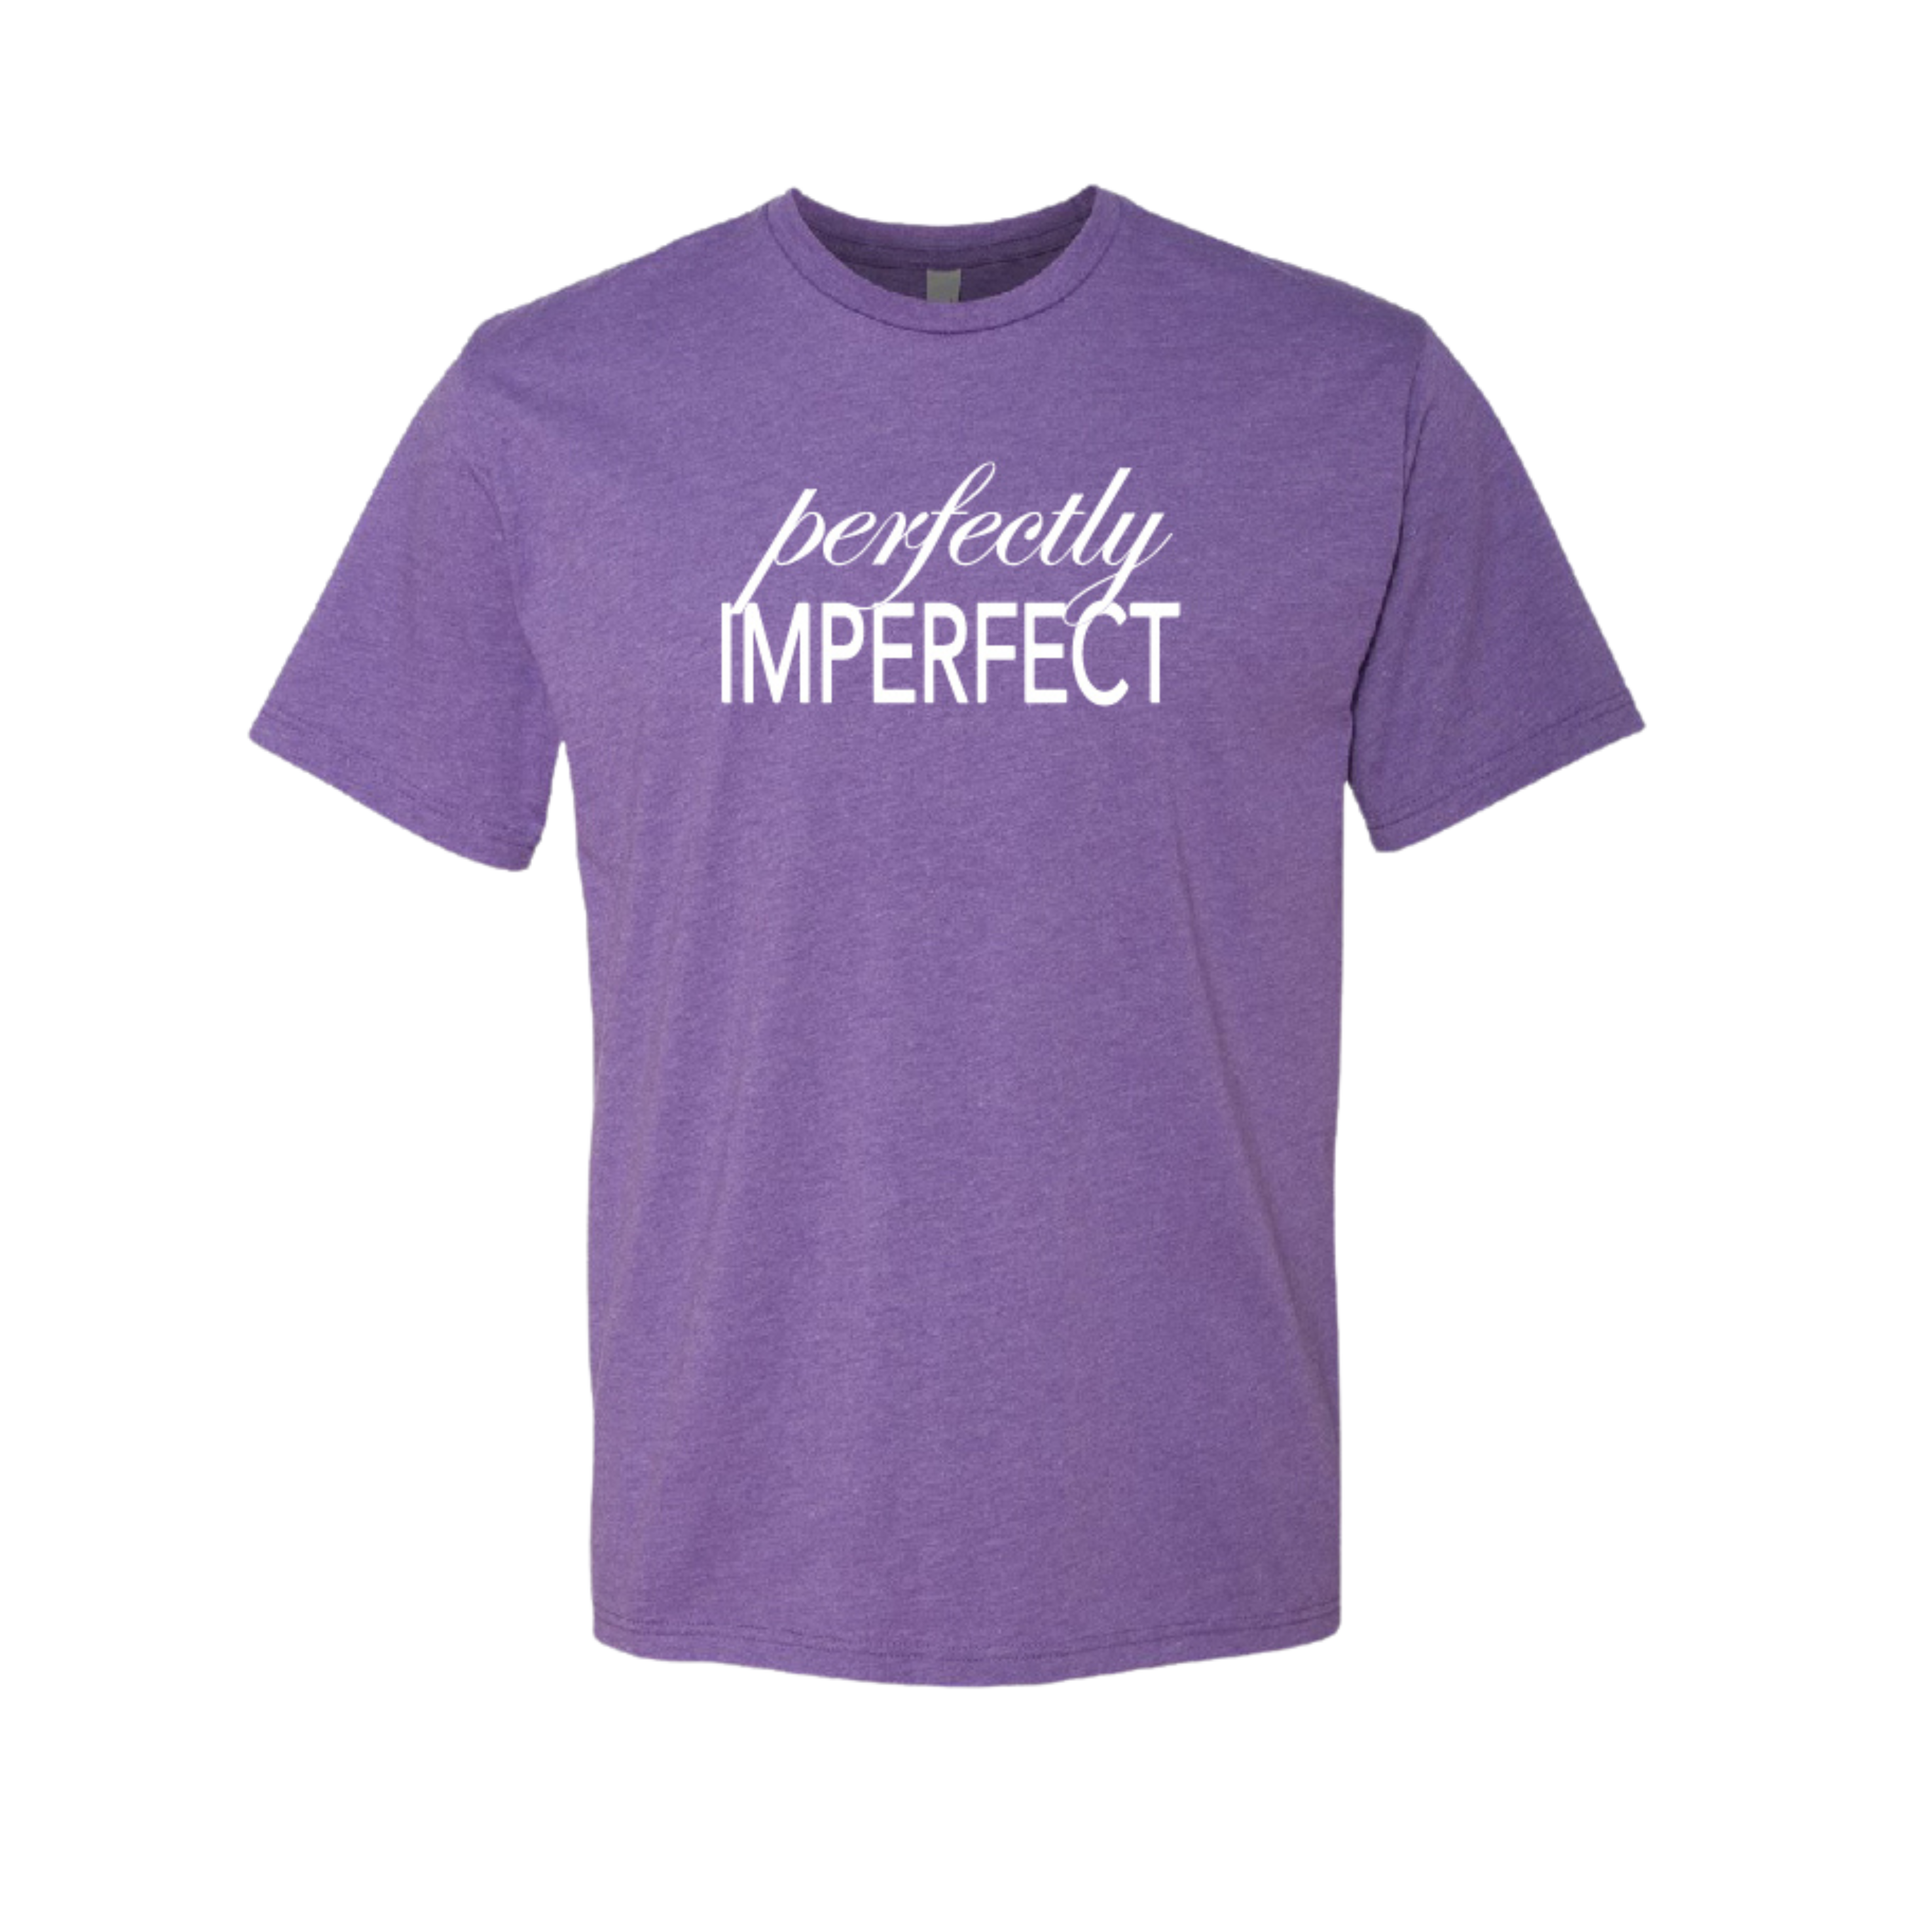 Purple Perfectly Imperfect T-shirt is a solid purple tee with Perfectly Imperfect printed across the chest of the tee in white.